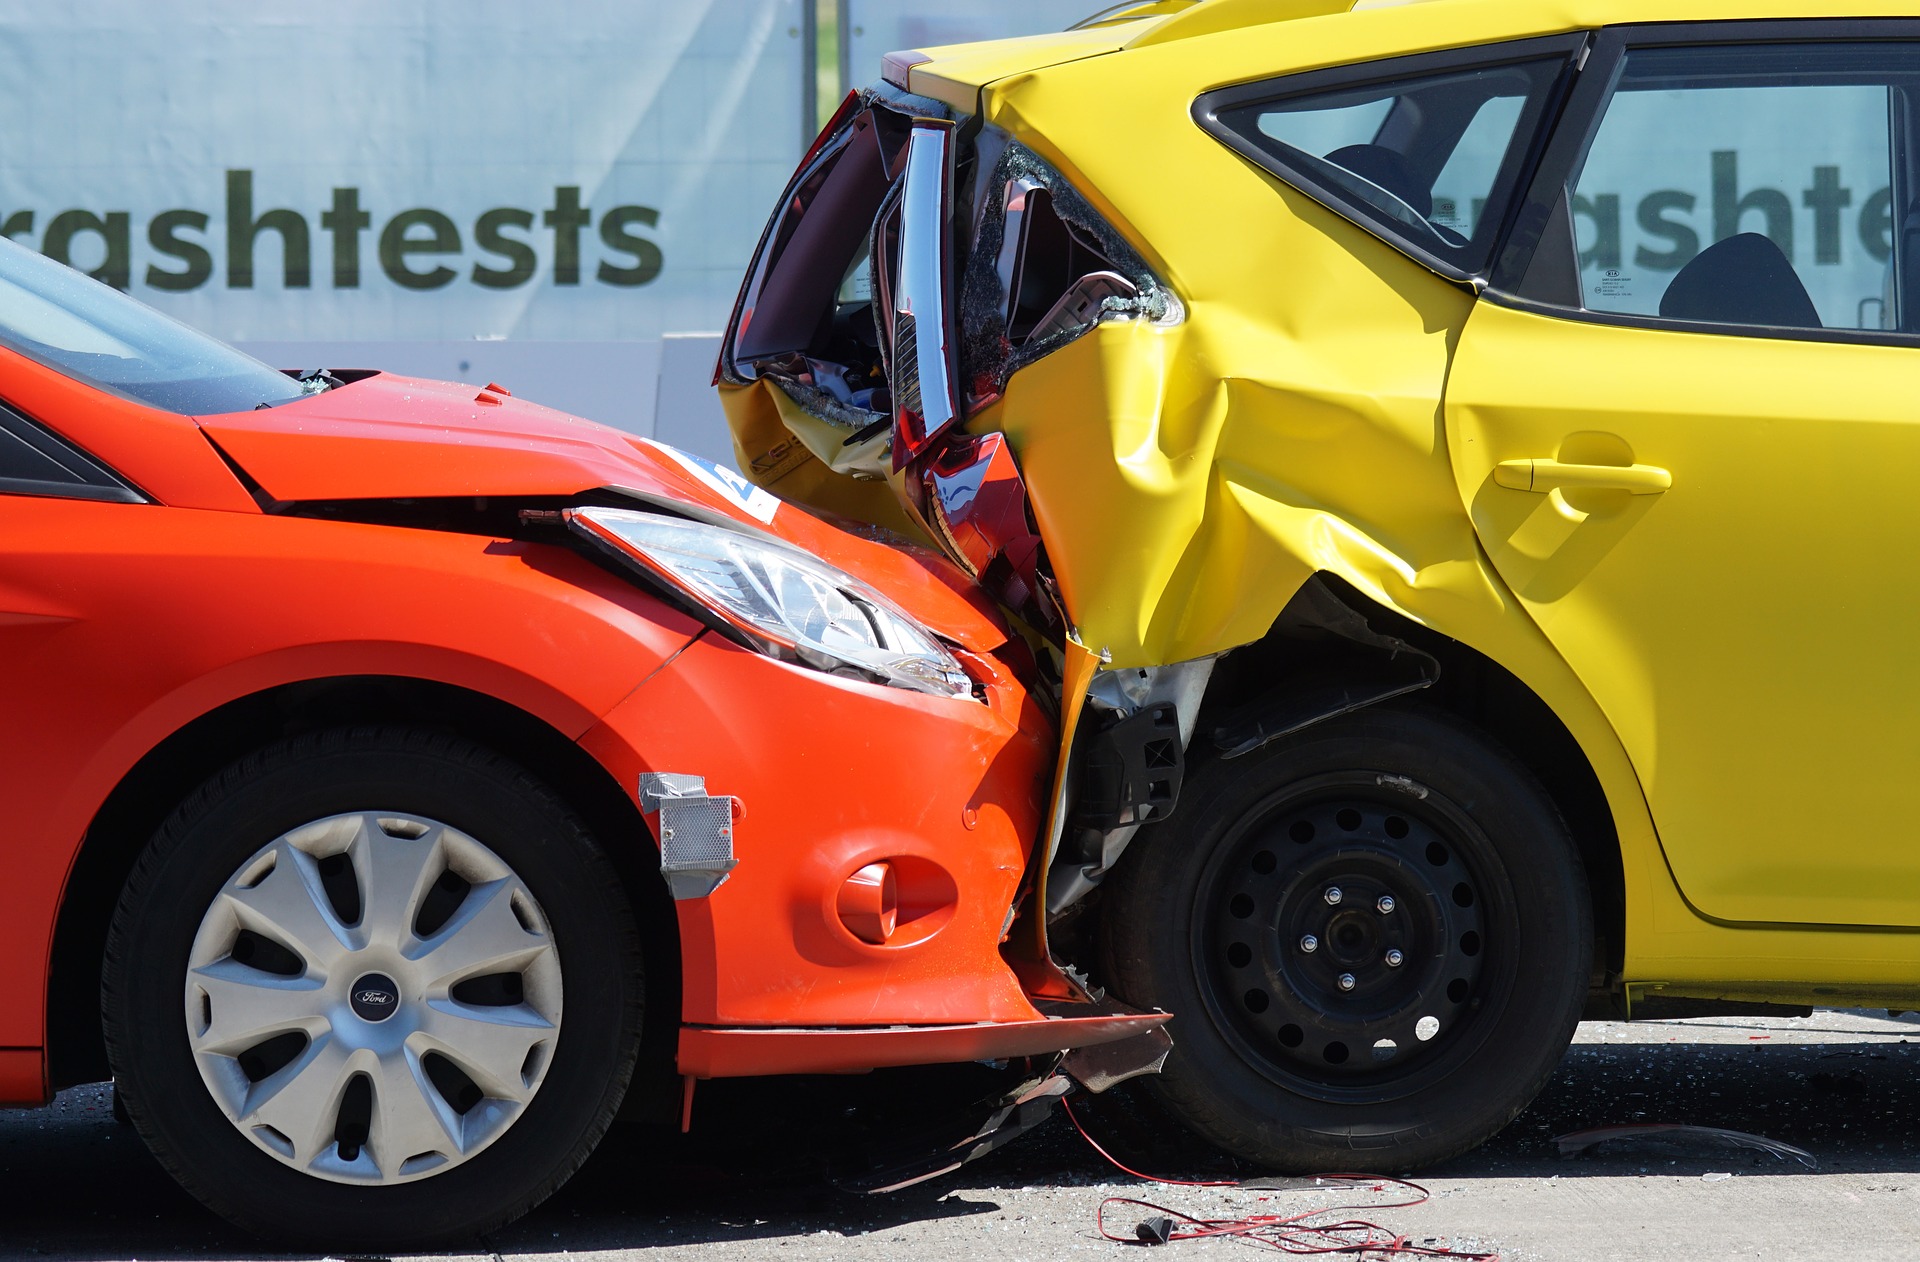 An orange car crashing into the rear of a yellow car which has crumpled under the impact.